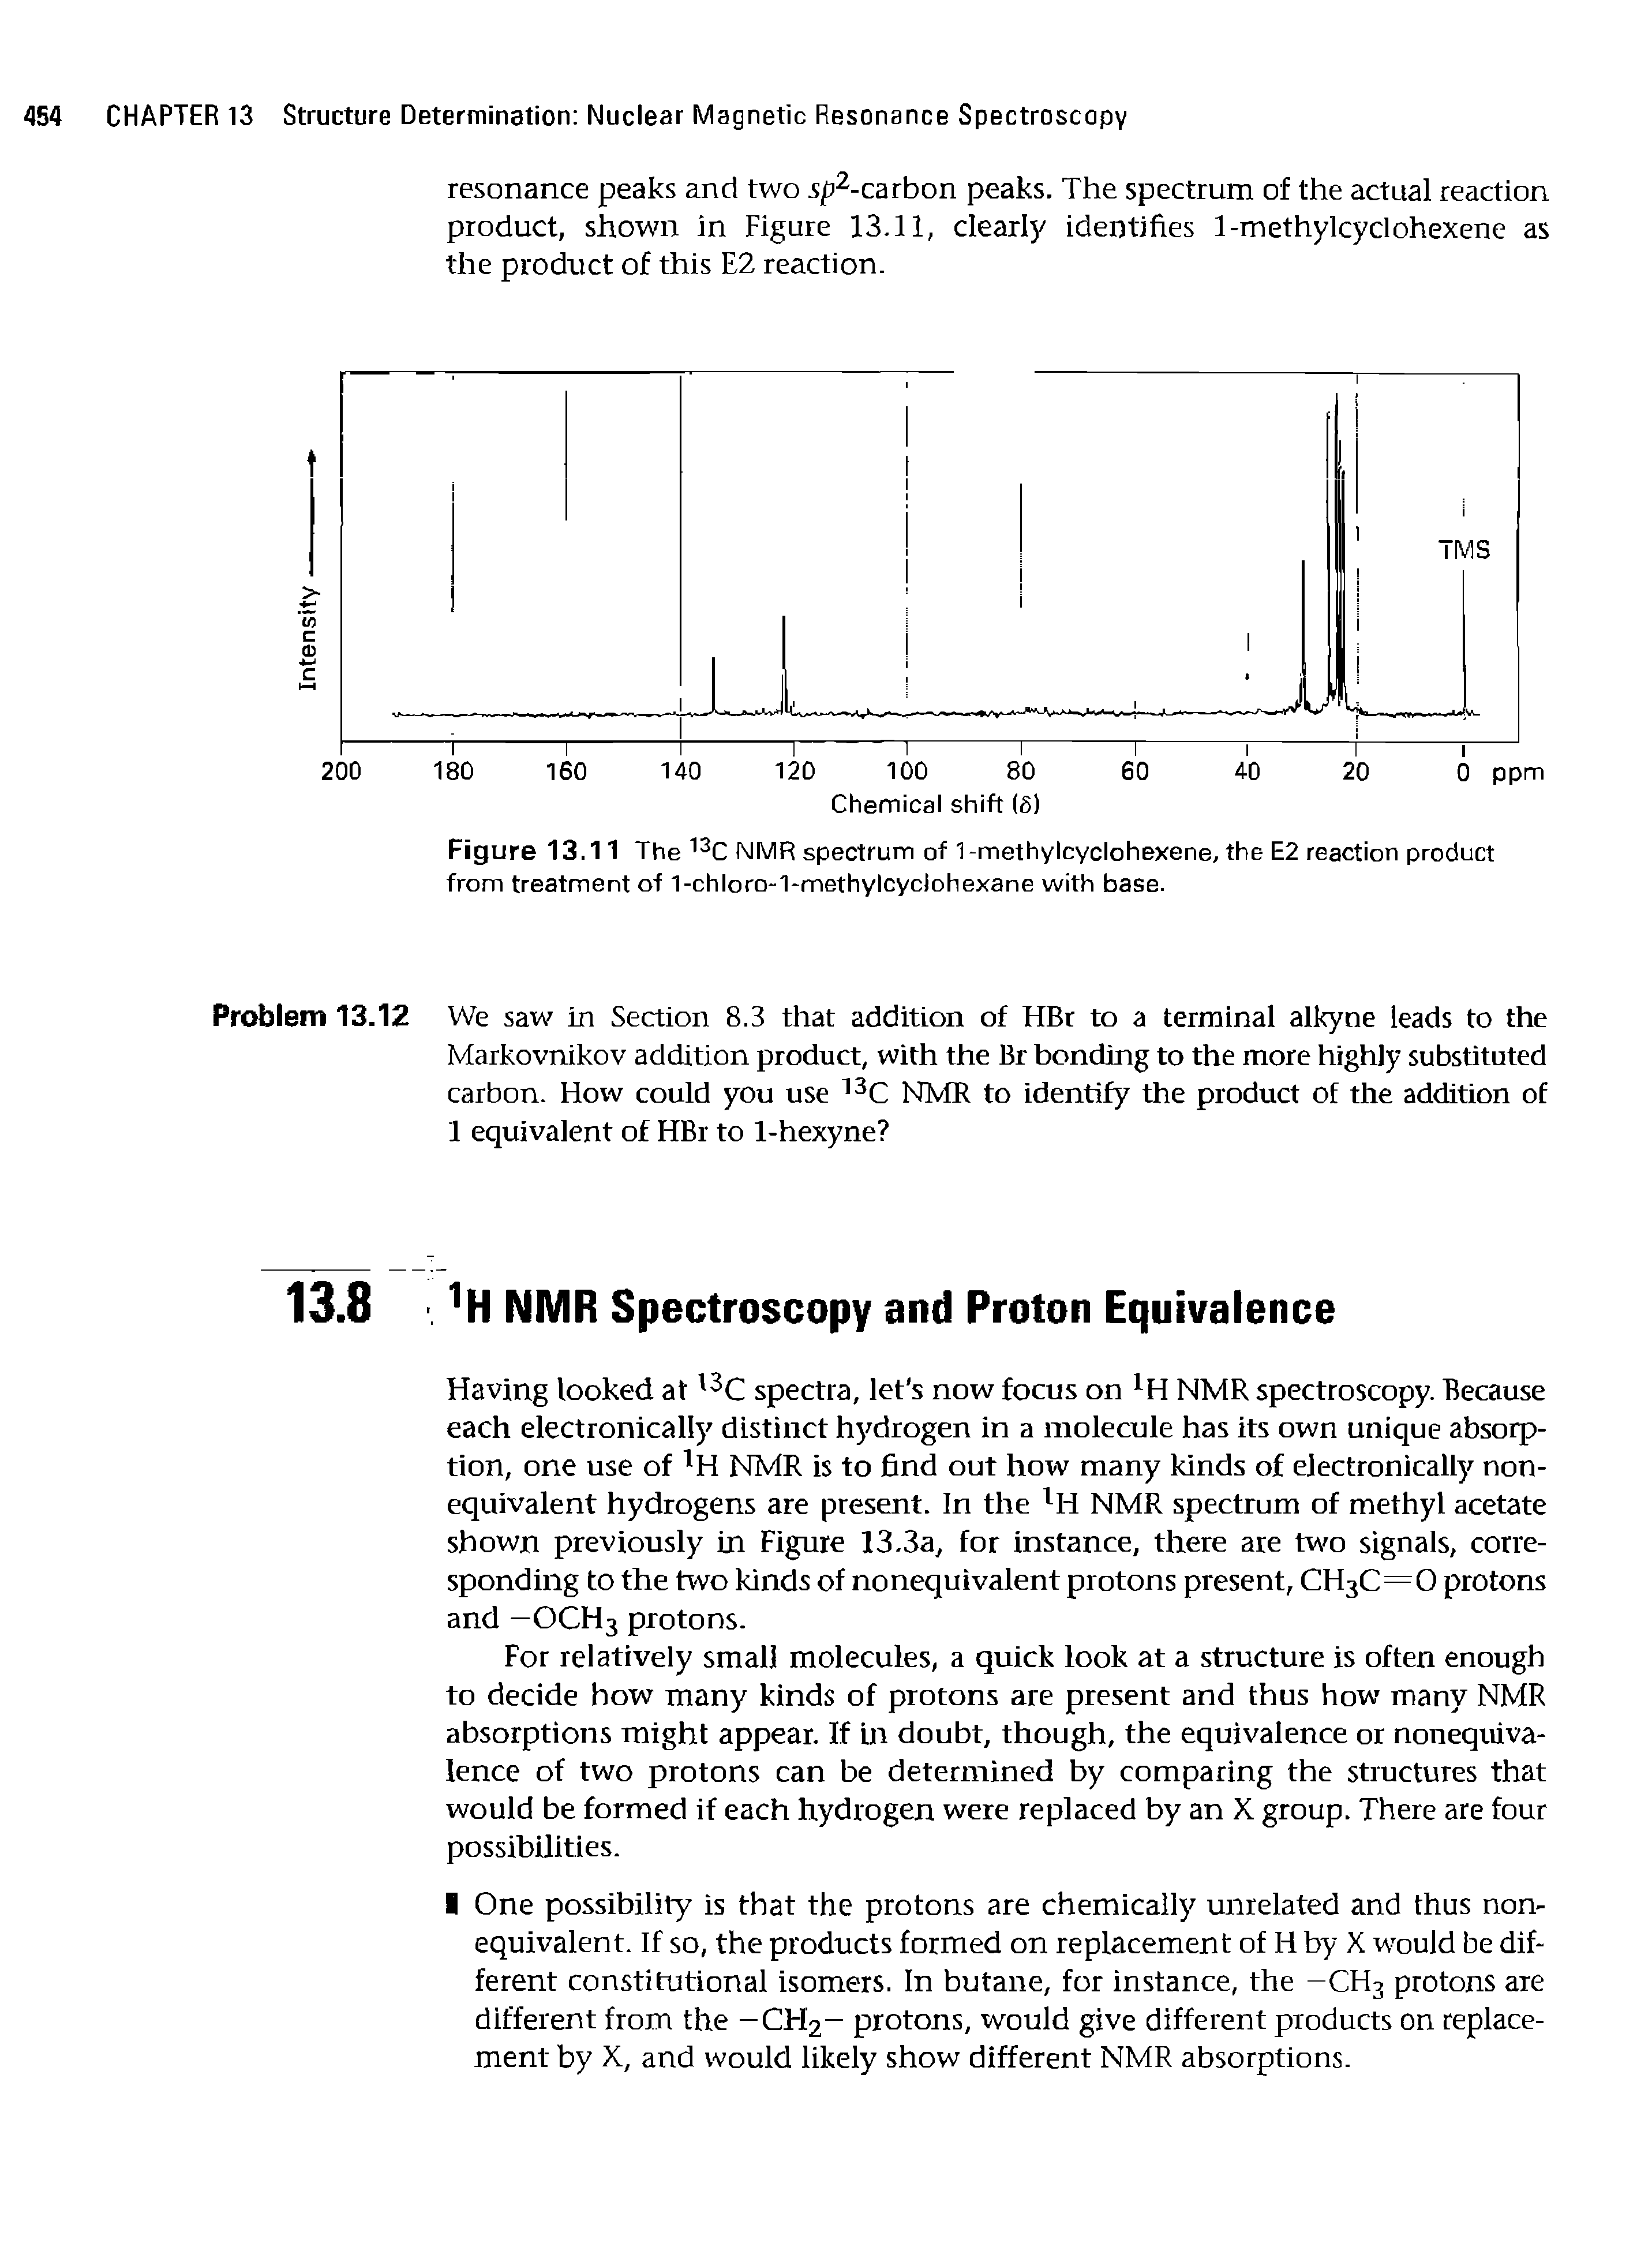 Figure 13.11 The 13C NMR spectrum of 1-methylcyclohexene, the E2 reaction product from treatment of 1-chloro-1-methylcyclohexane with base.